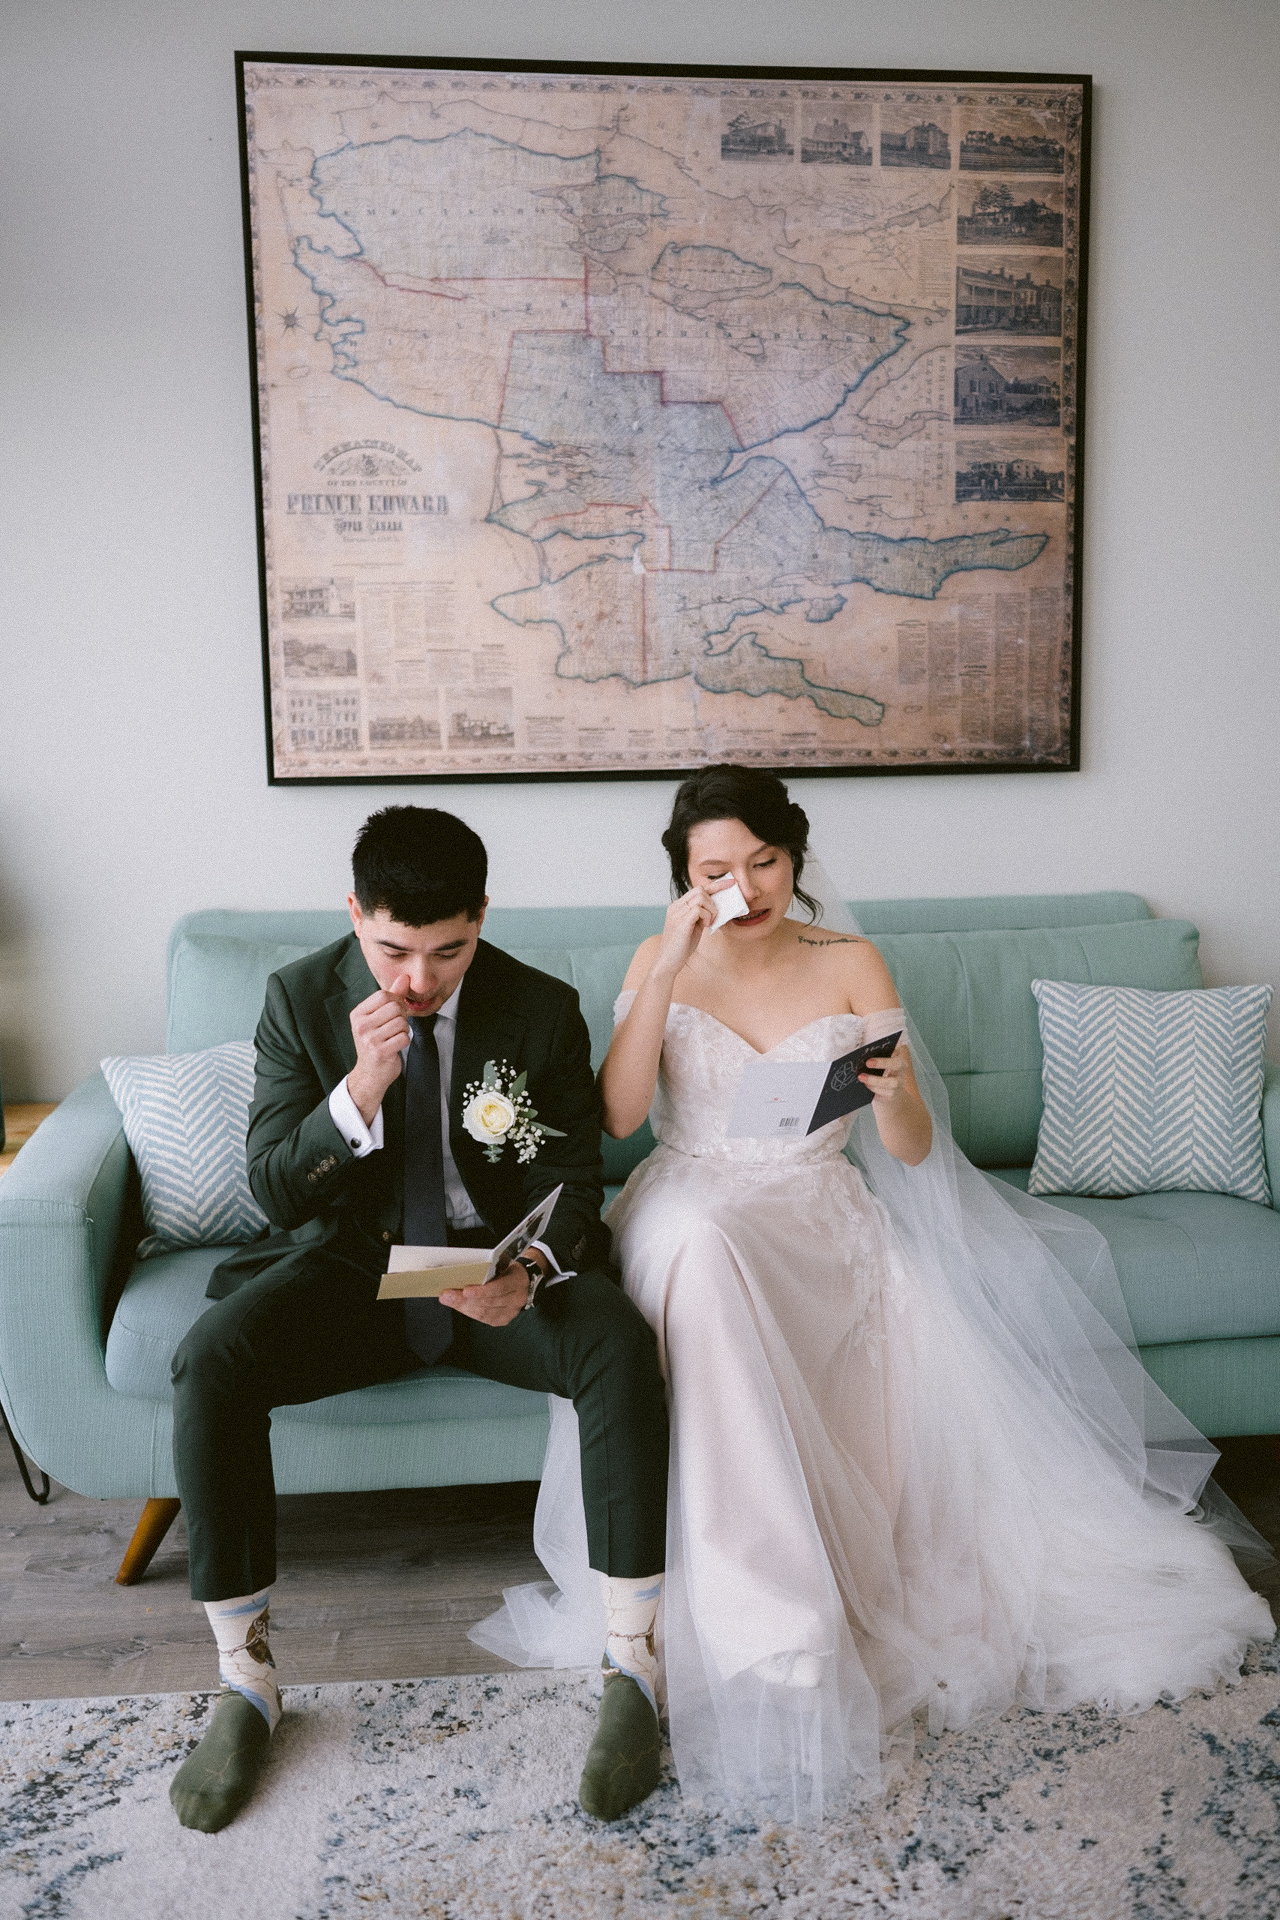 A bride and groom sitting on a sofa, reading heartfelt notes, with the groom appearing to wipe a tear and the bride smiling